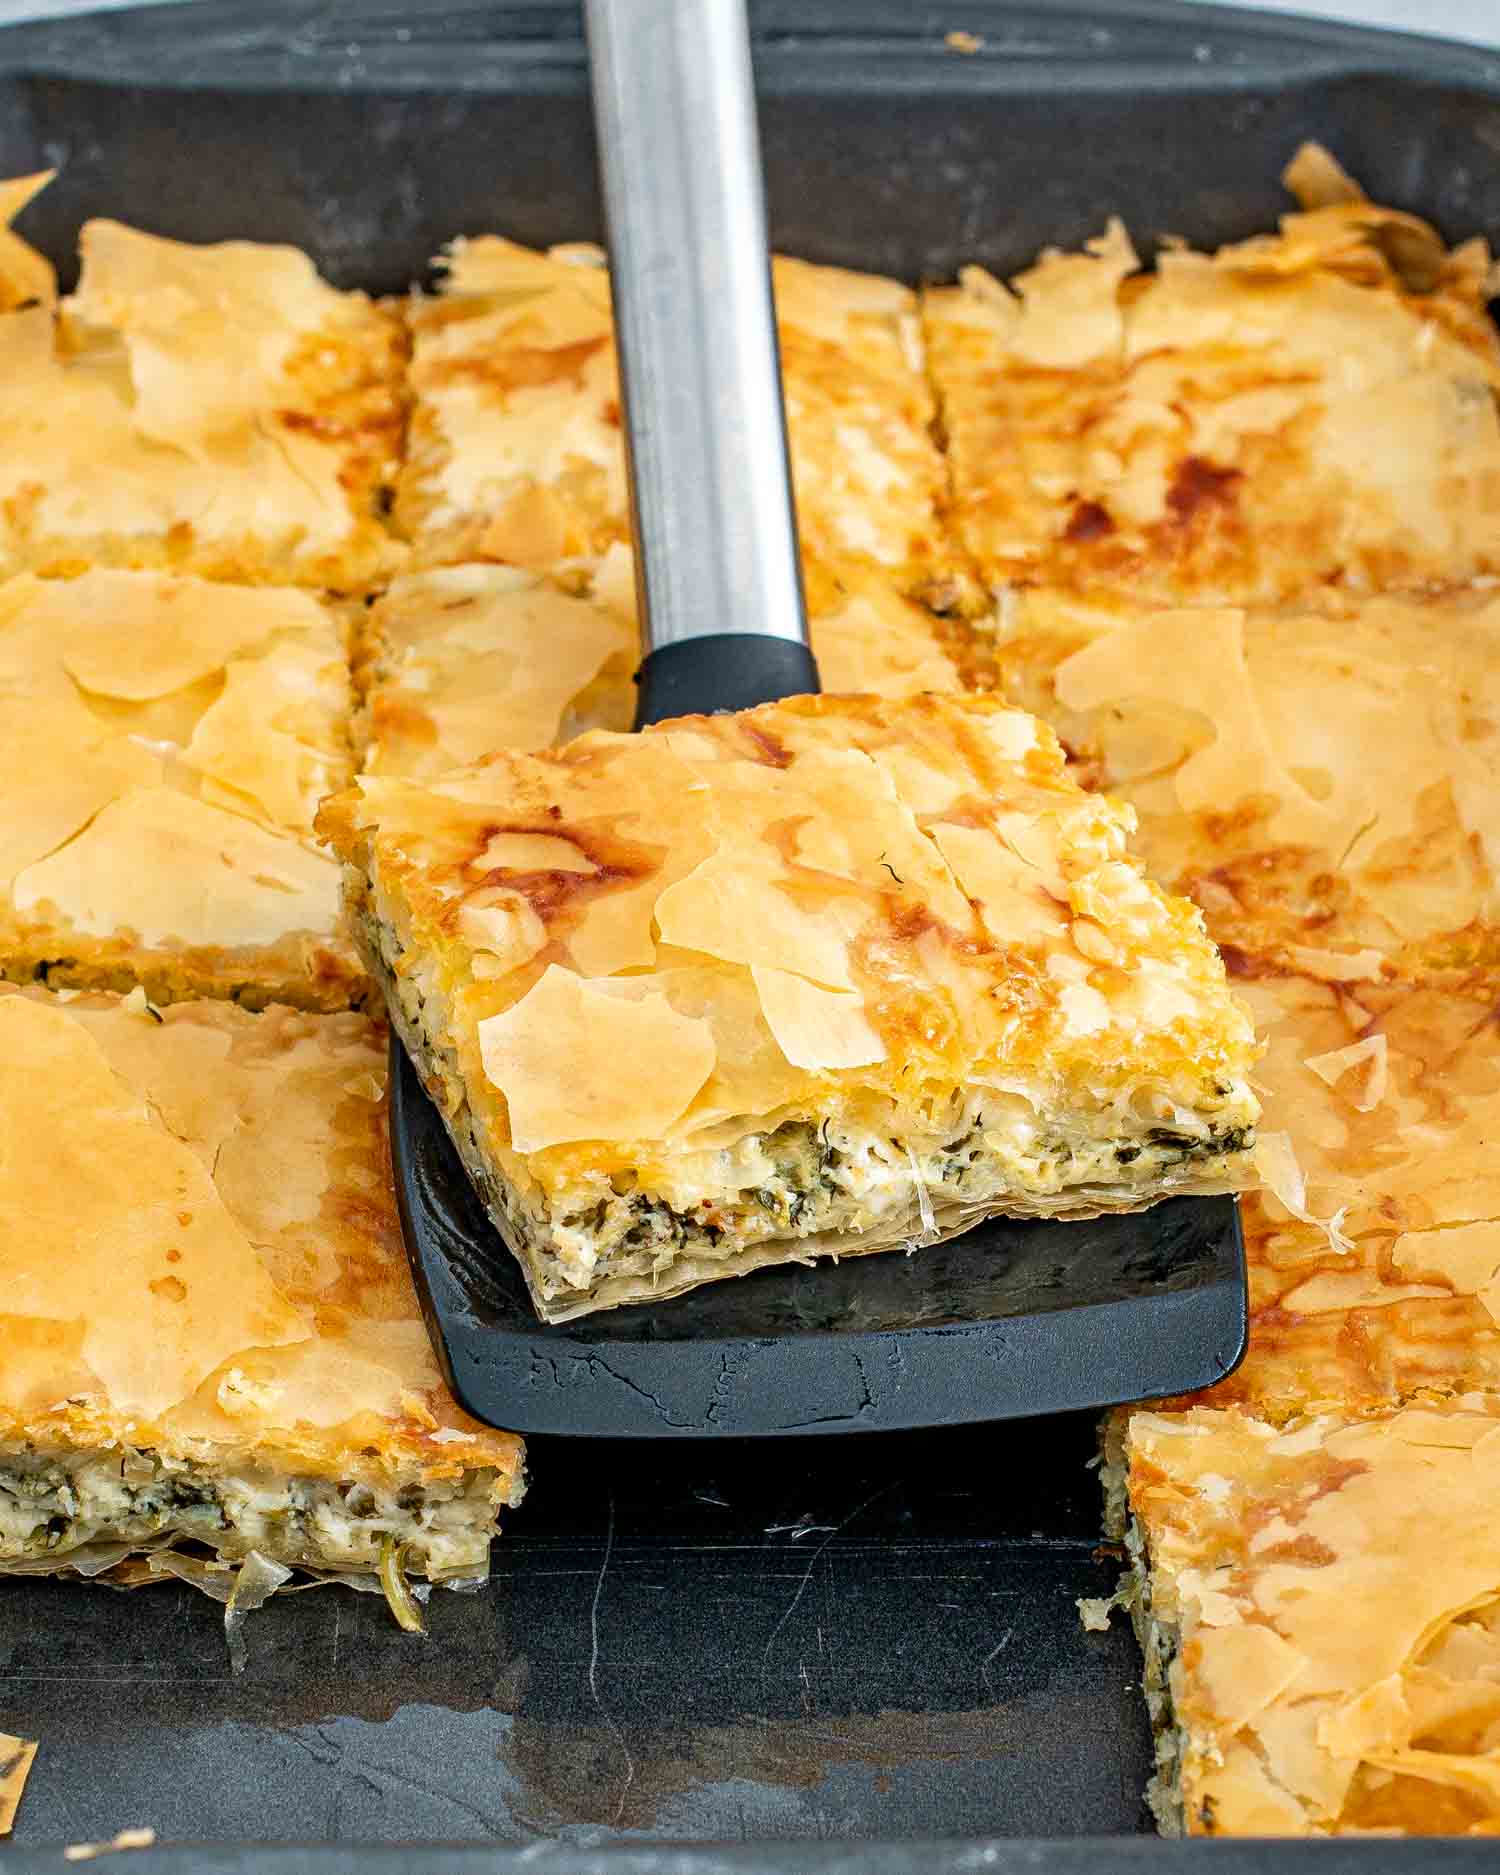 Golden-brown spanakopita with flaky phyllo crust, freshly baked and sliced in a pan.